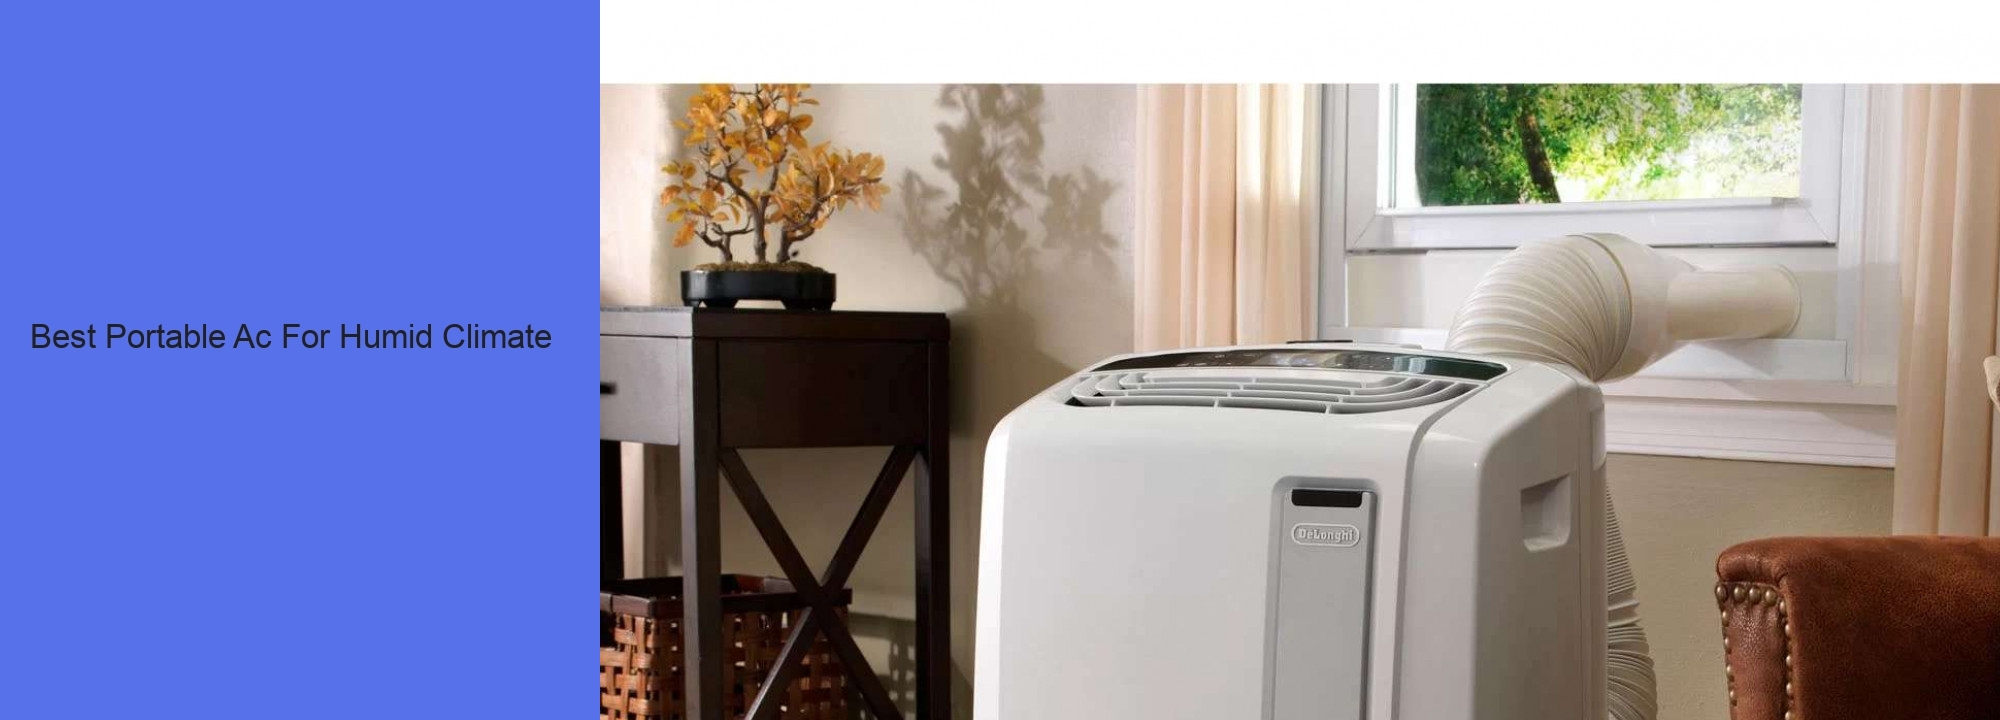 Best Portable Ac For Humid Climate